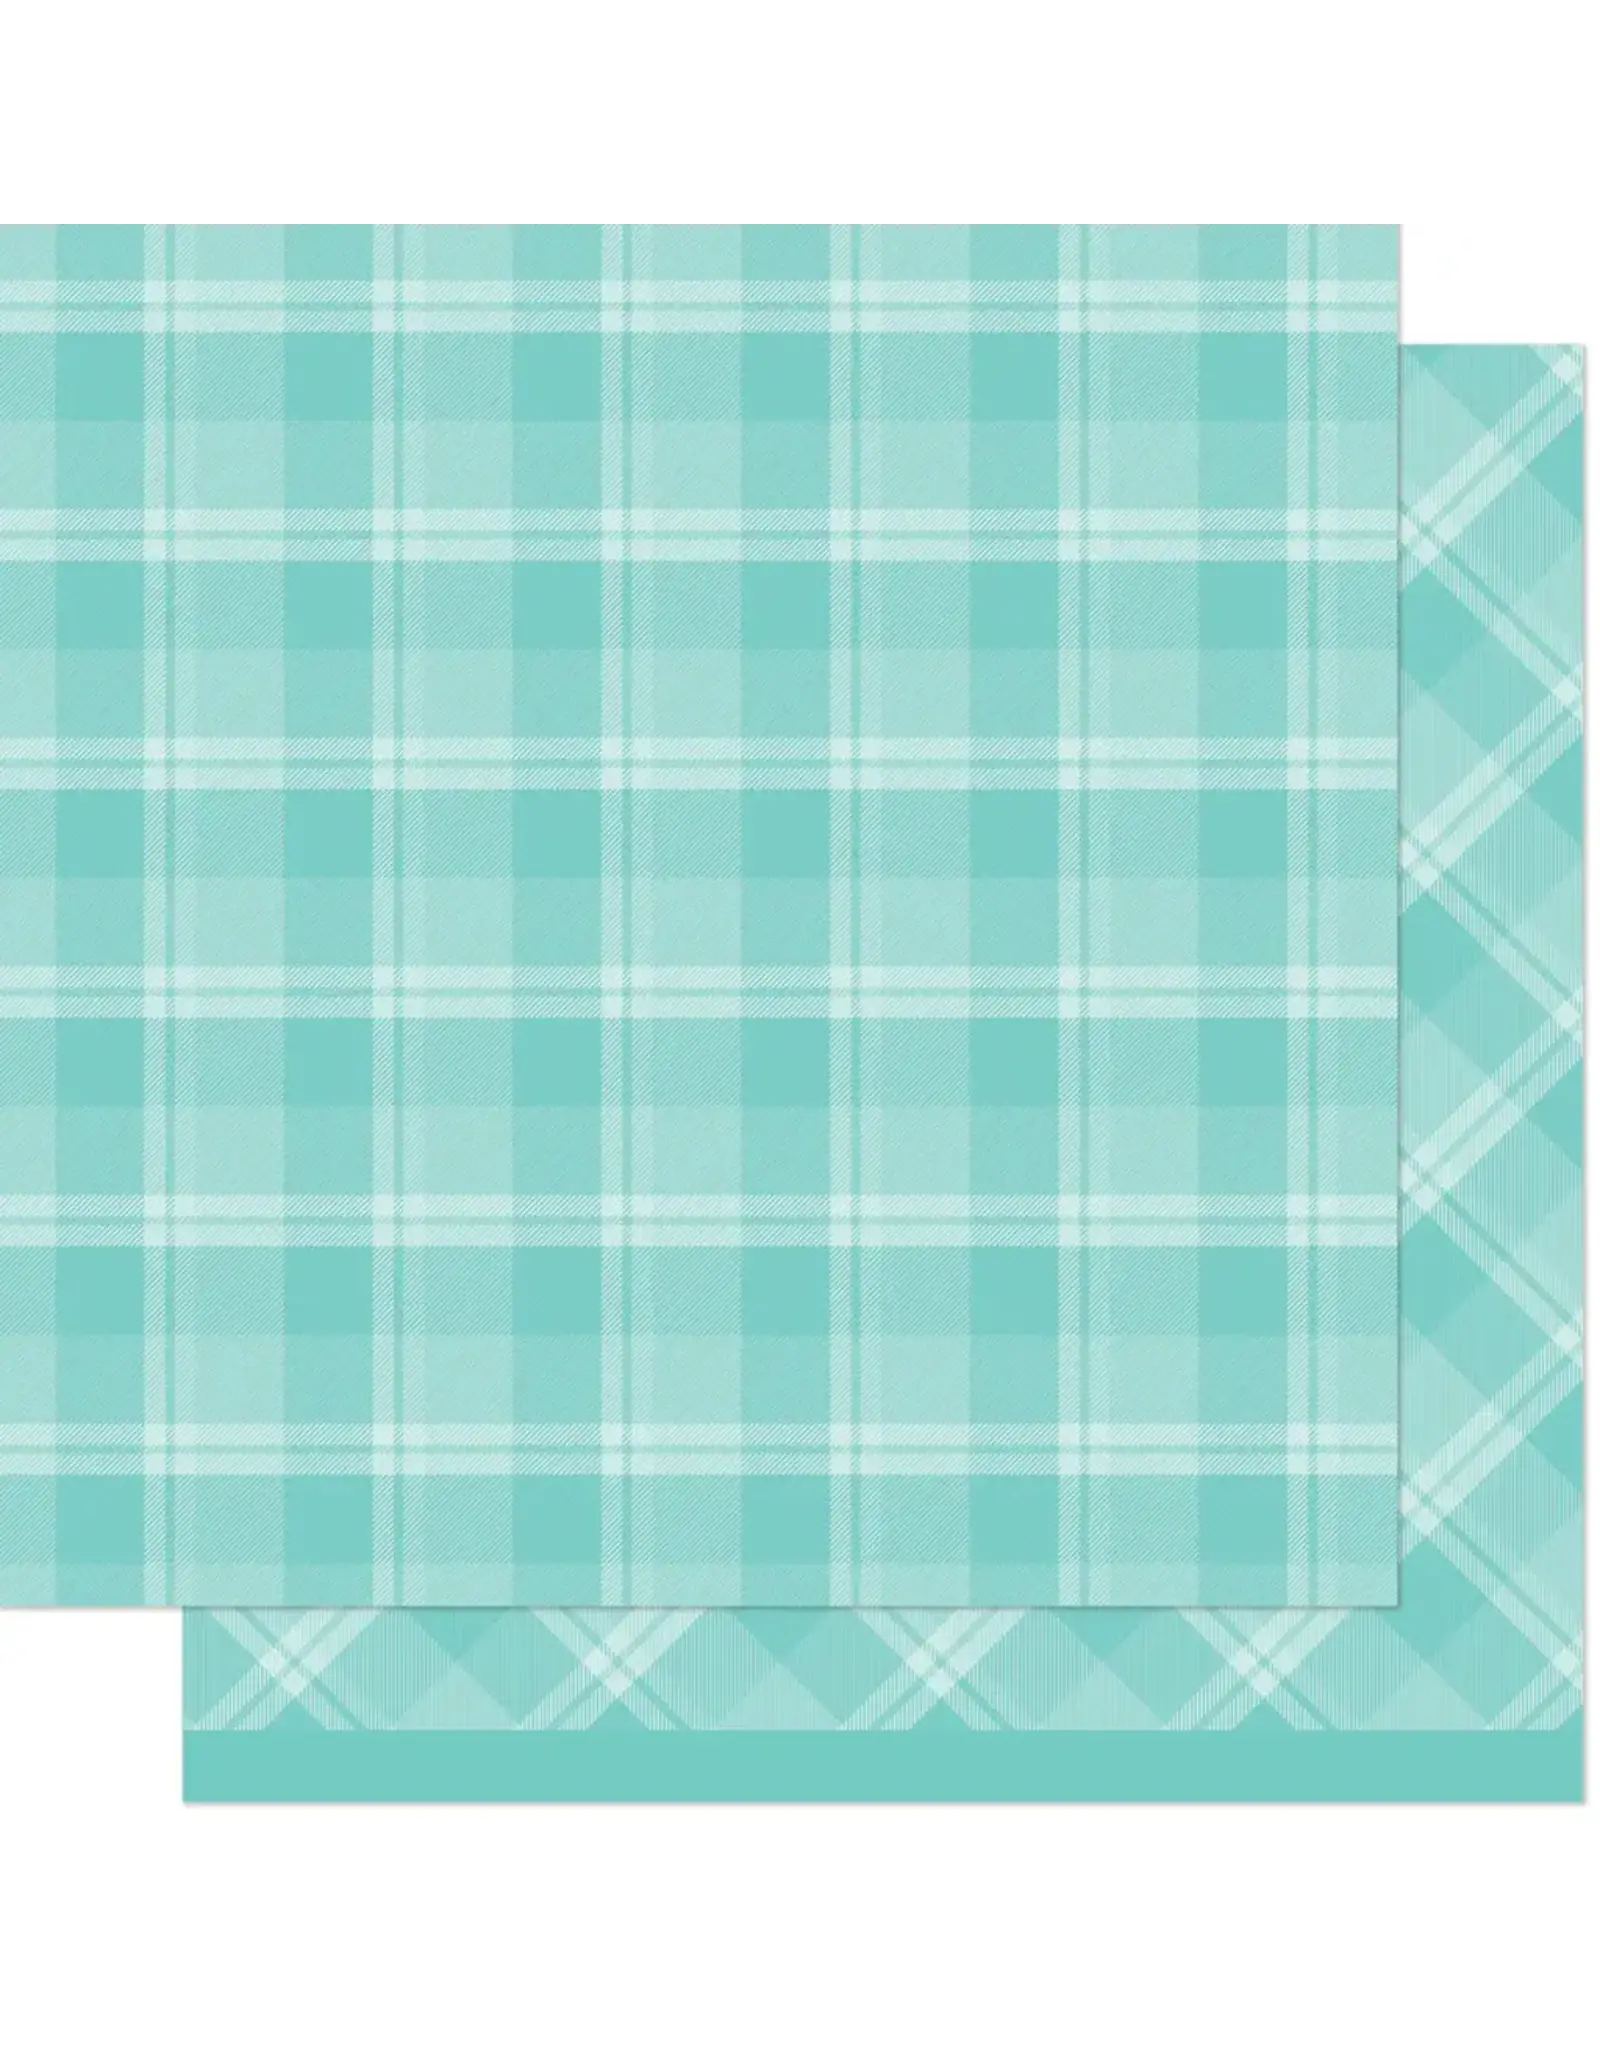 LAWN FAWN LAWN FAWN FAVORITE FLANNEL HOT TODDY 12X12 CARDSTOCK